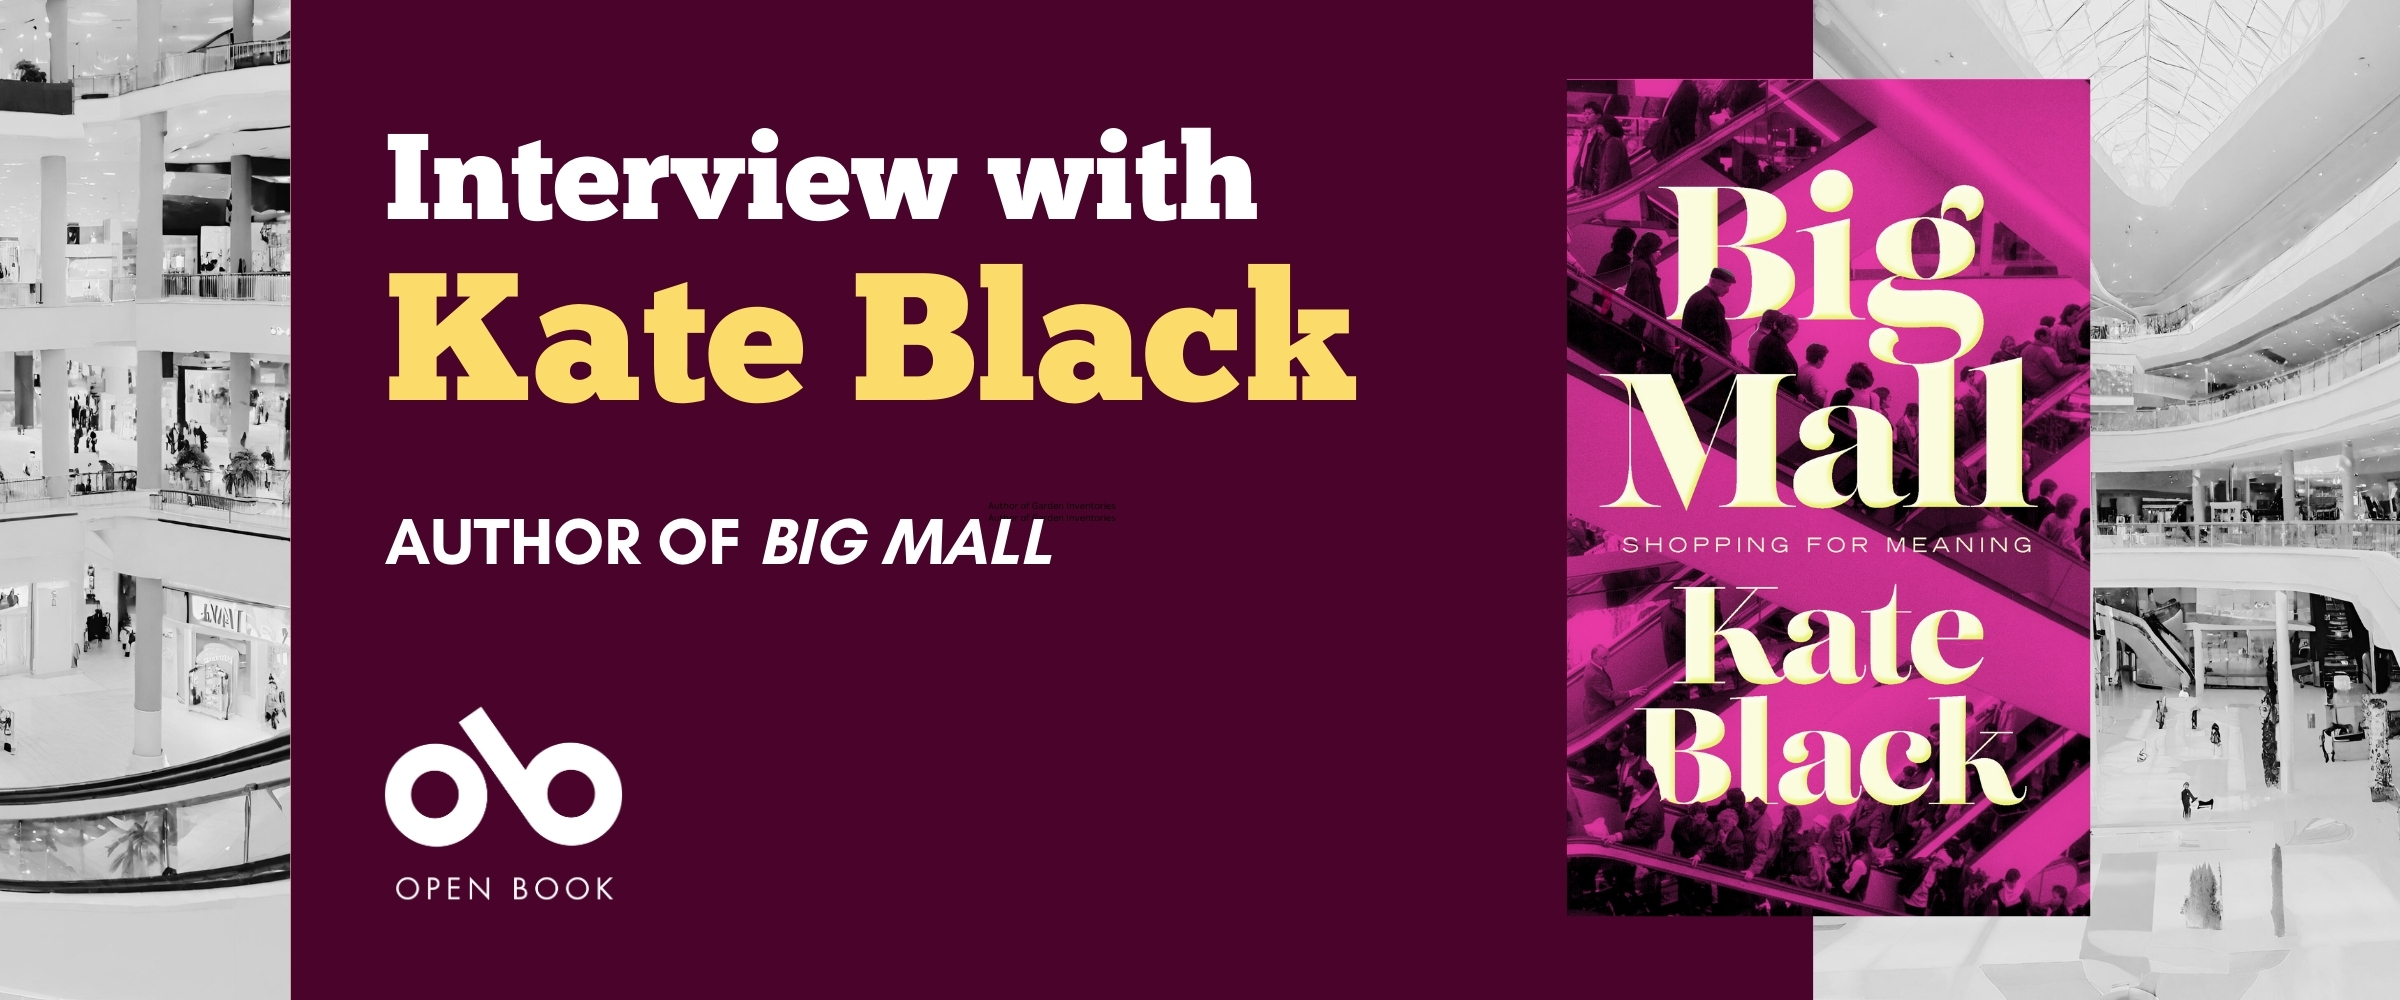 Big Mall by Kate Black, text on burgundy background next to book cover, with shipping mall images in background